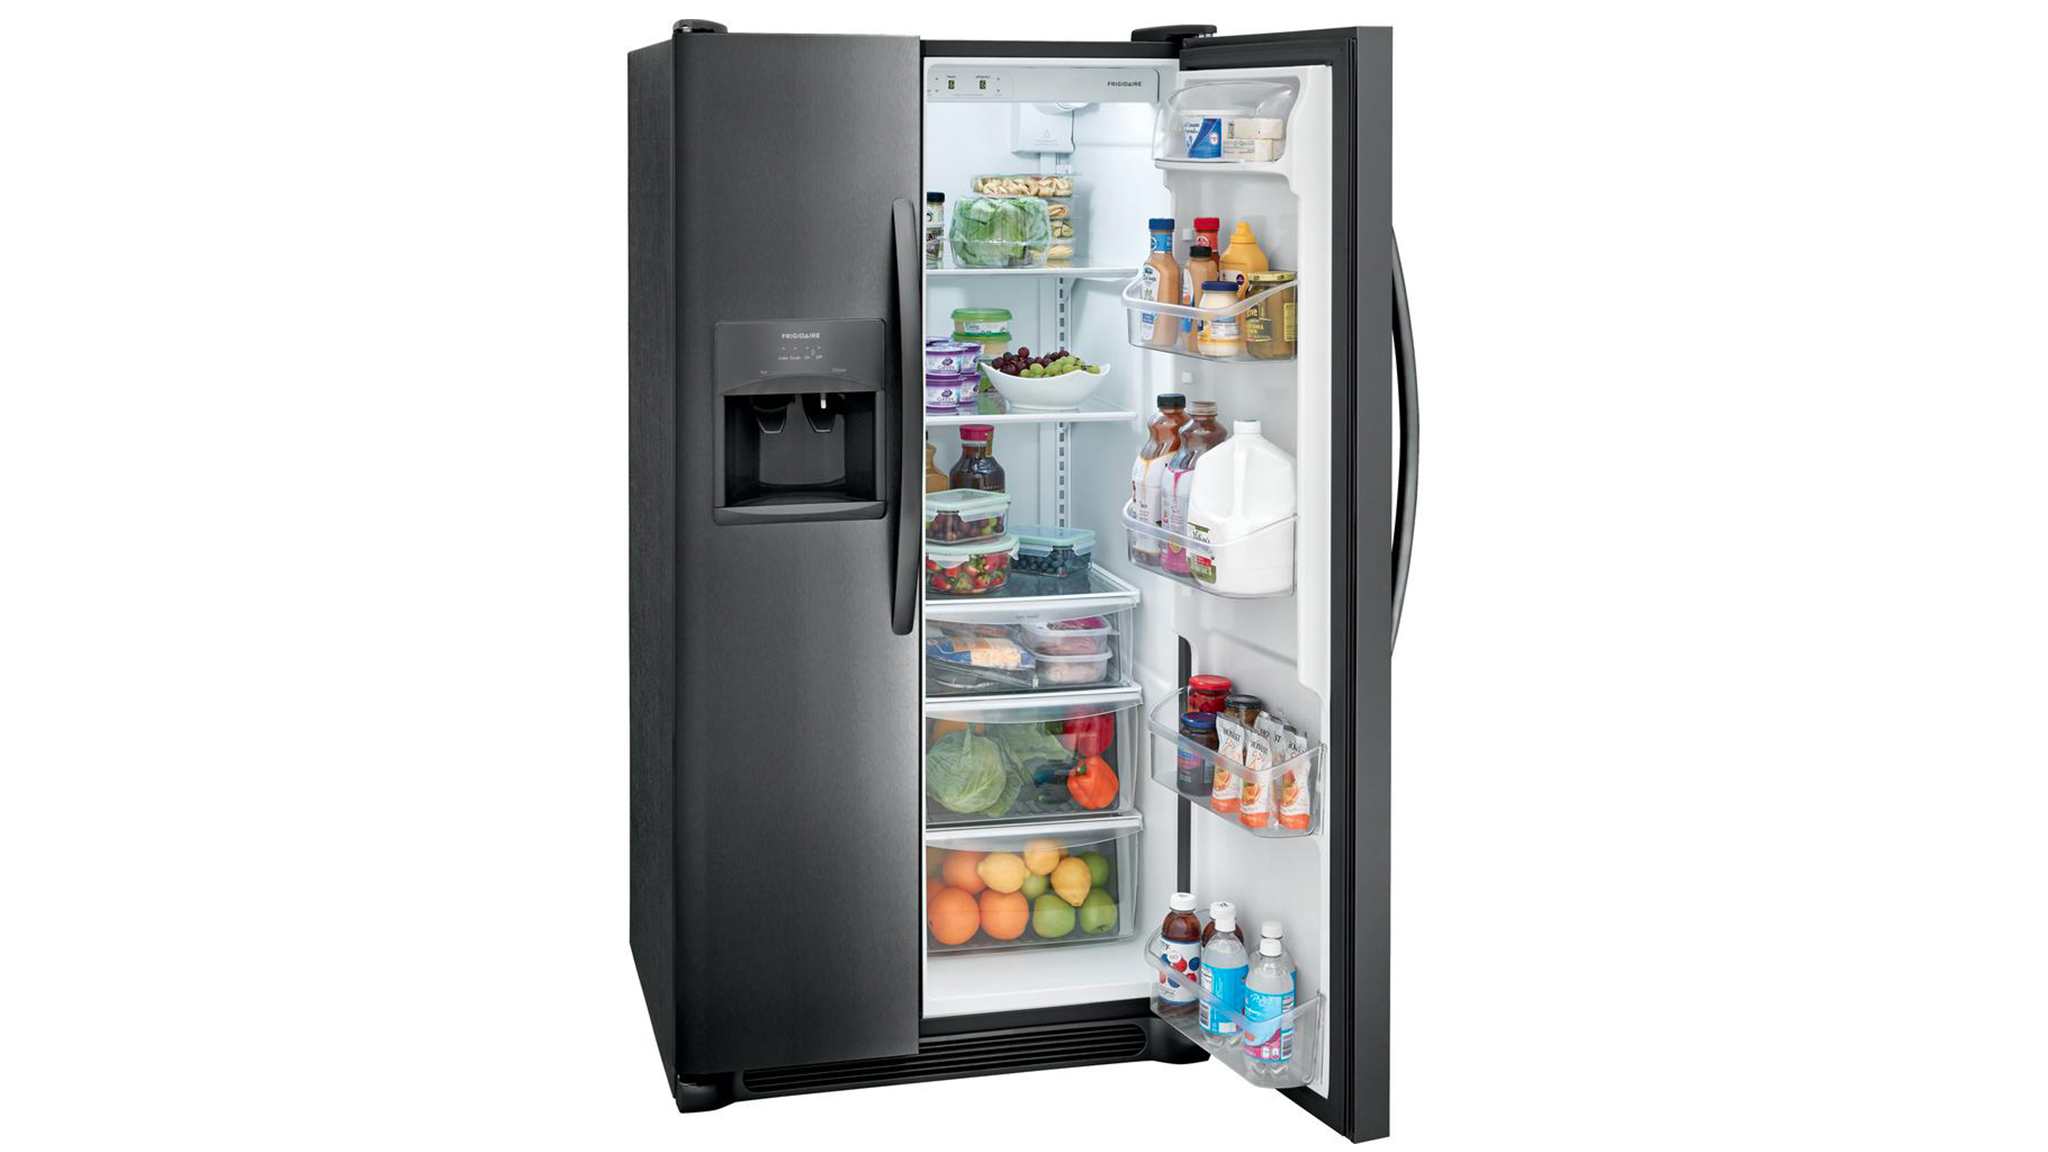 Get 10 off LG, Frigidaire and GE fridges with these Home Depot Black